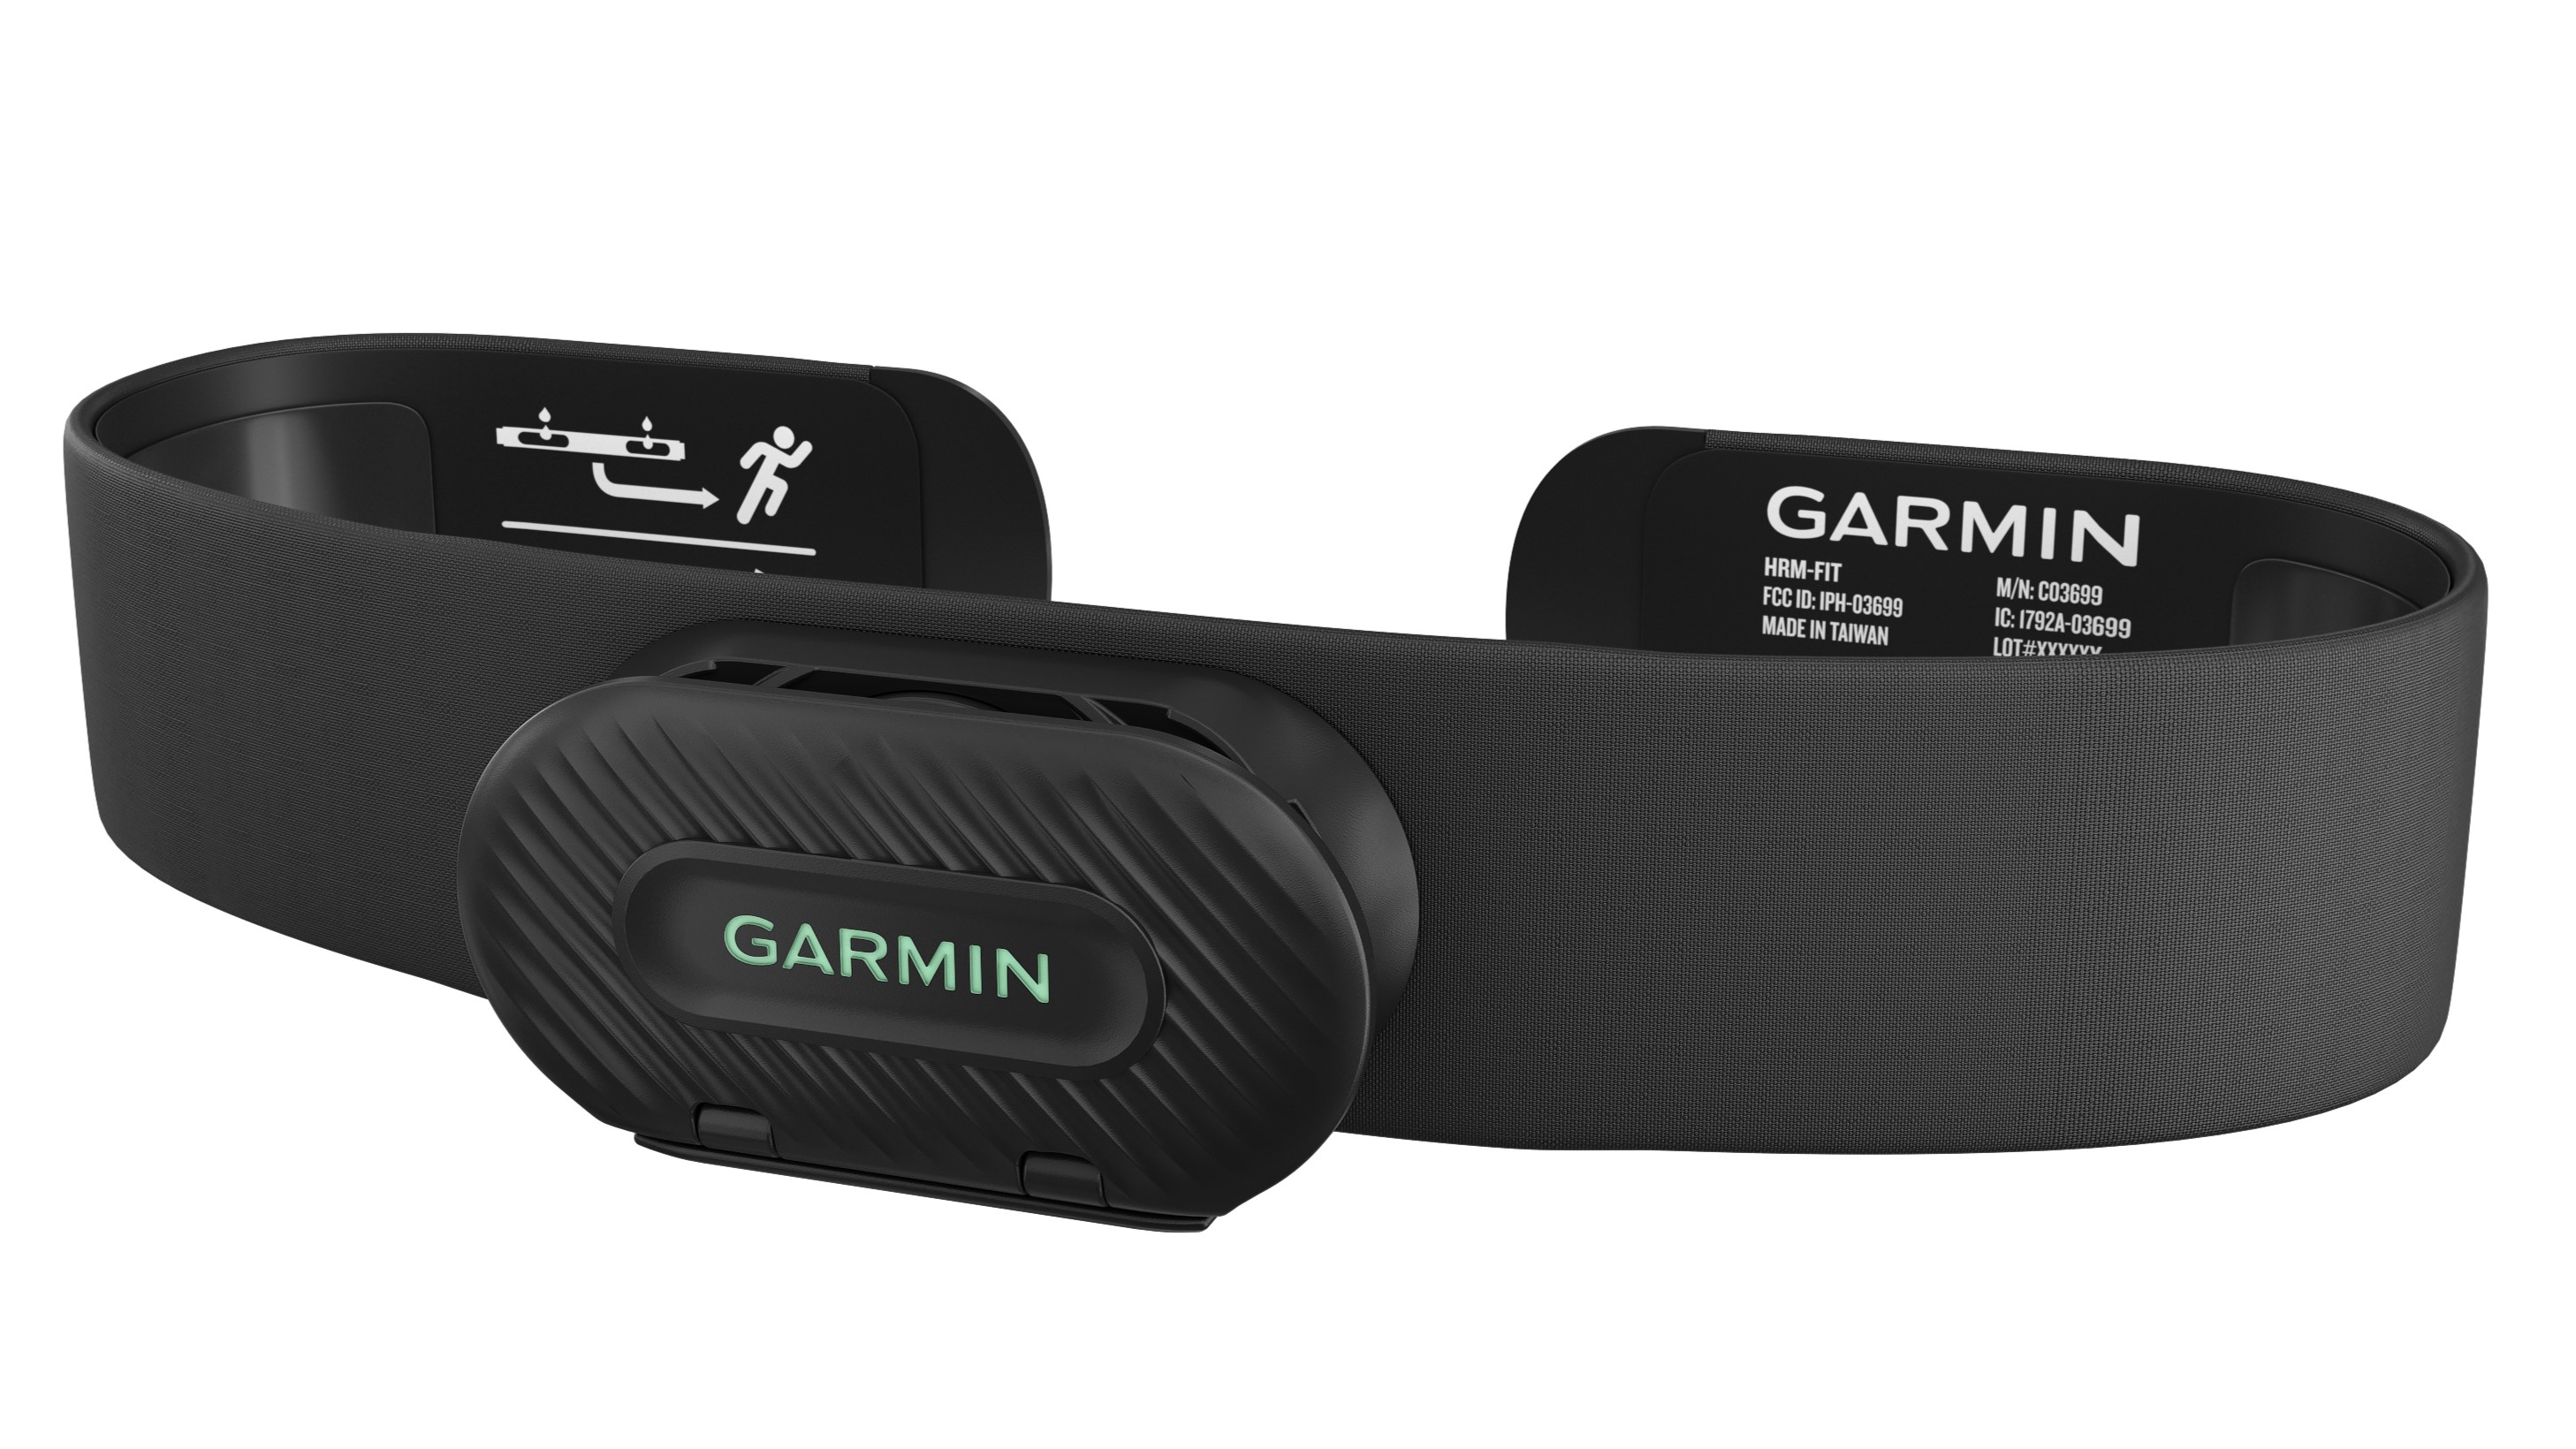 Garmin launches HRM-Fit heart rate monitor specifically designed for women